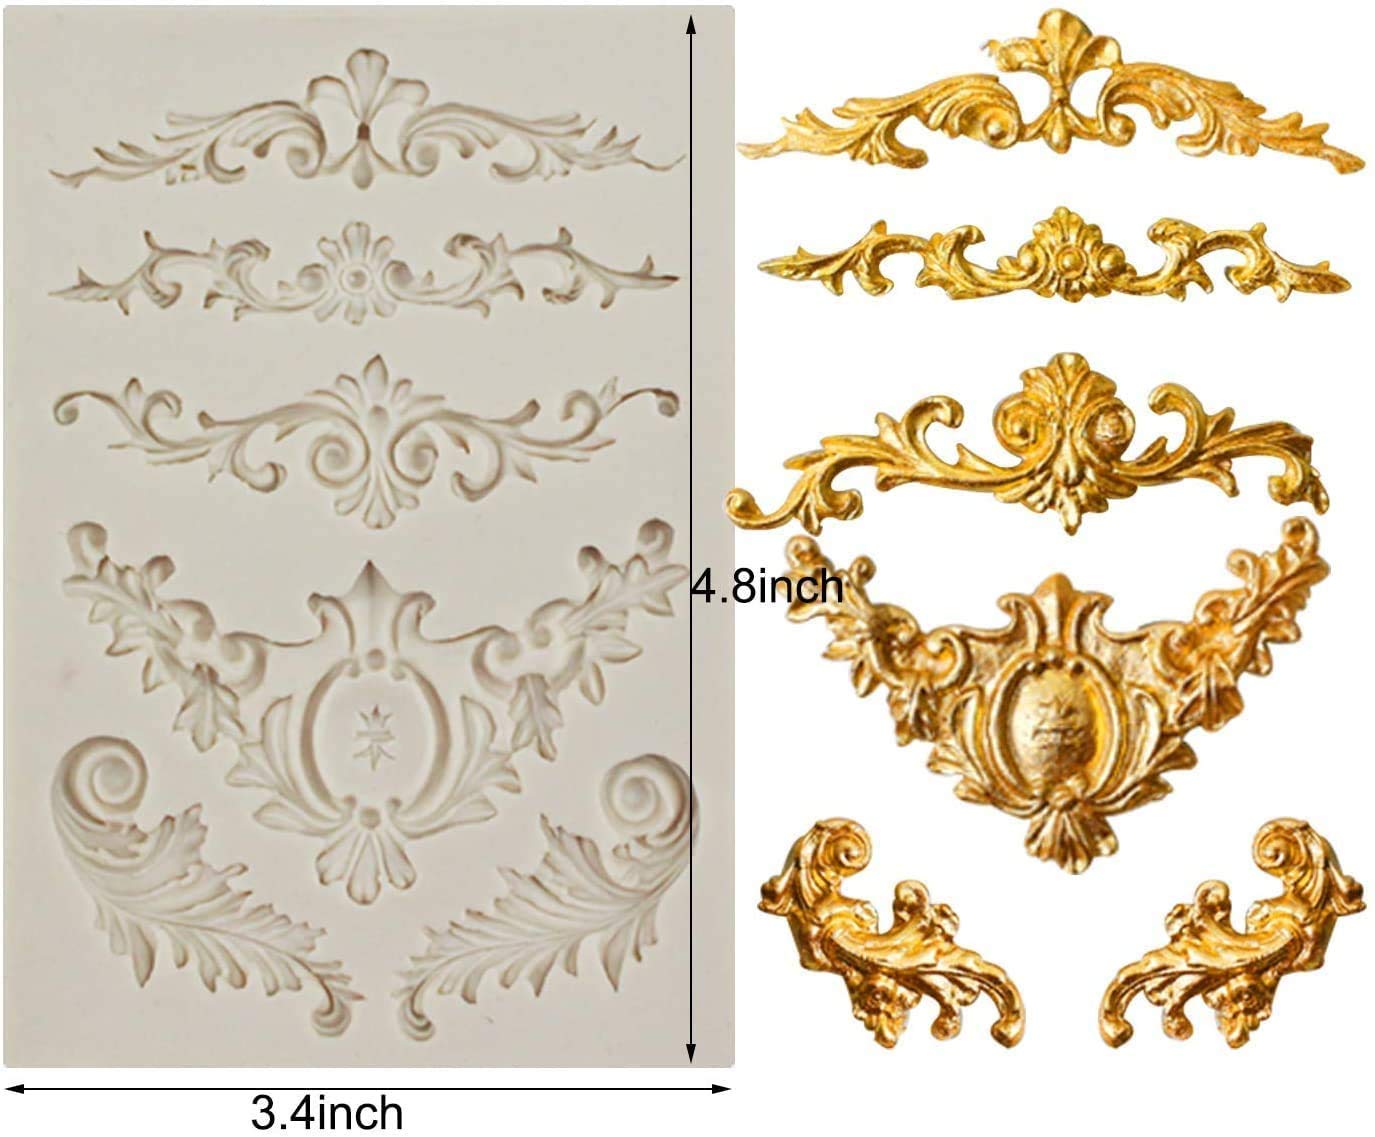 3 Pieces Baroque Fondant Molds Scroll Border Lace Silicone Molds Curlicues Gum Paste Candy Chocolate Molds for Cake Decorating Sugar Craft Polymer Clay